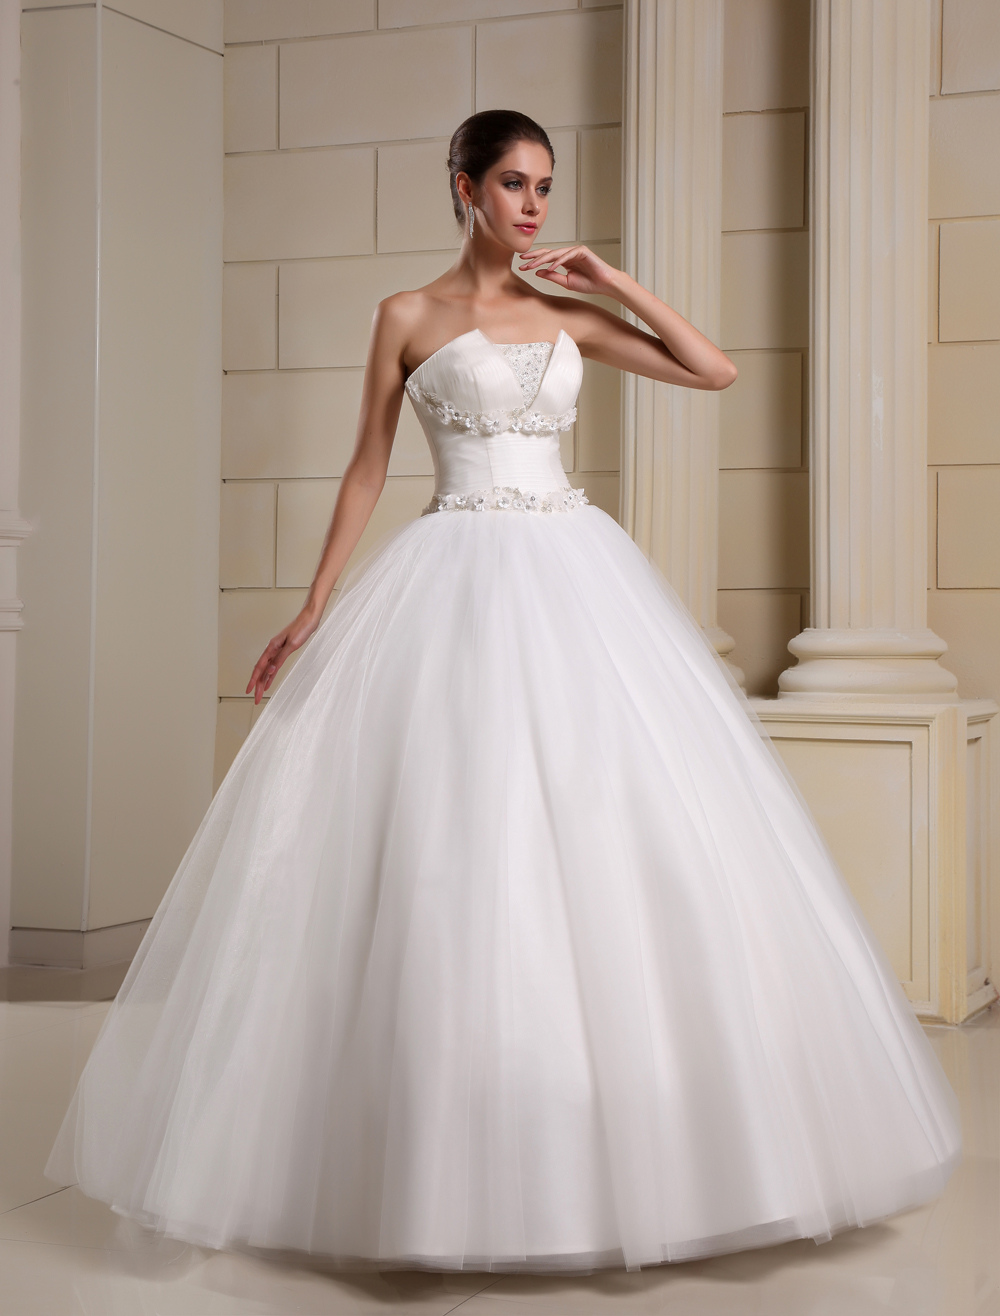 Ivory A-Line Strapless Beading Floral Tulle Bridal Wedding Gown ...